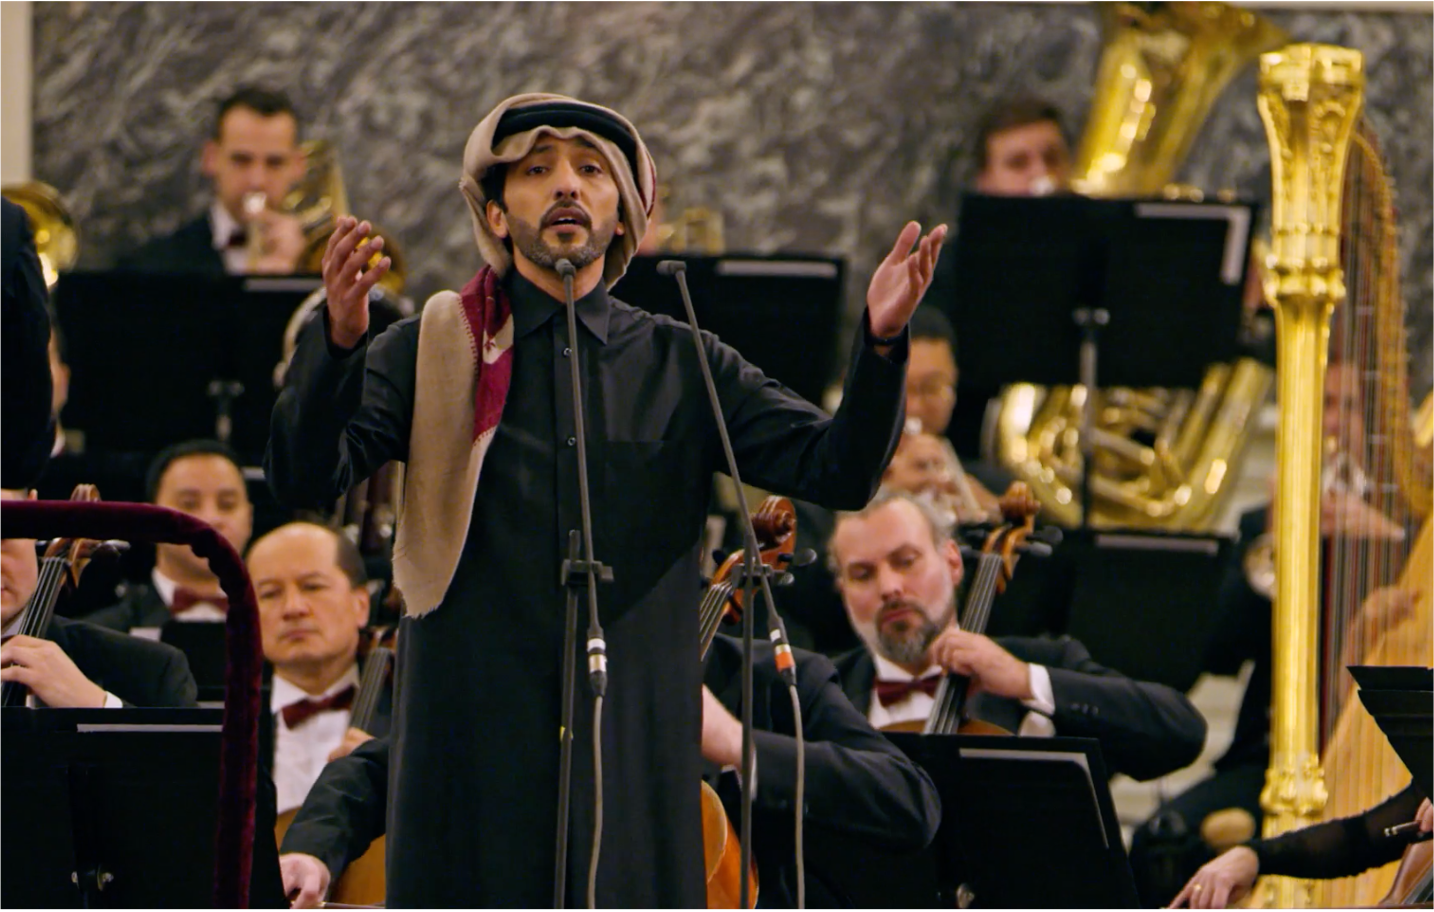 Middle Eastern man sings with an orchestra at the VII International Cultural Forum during Qatar-Russia 2018 Year of Culture.